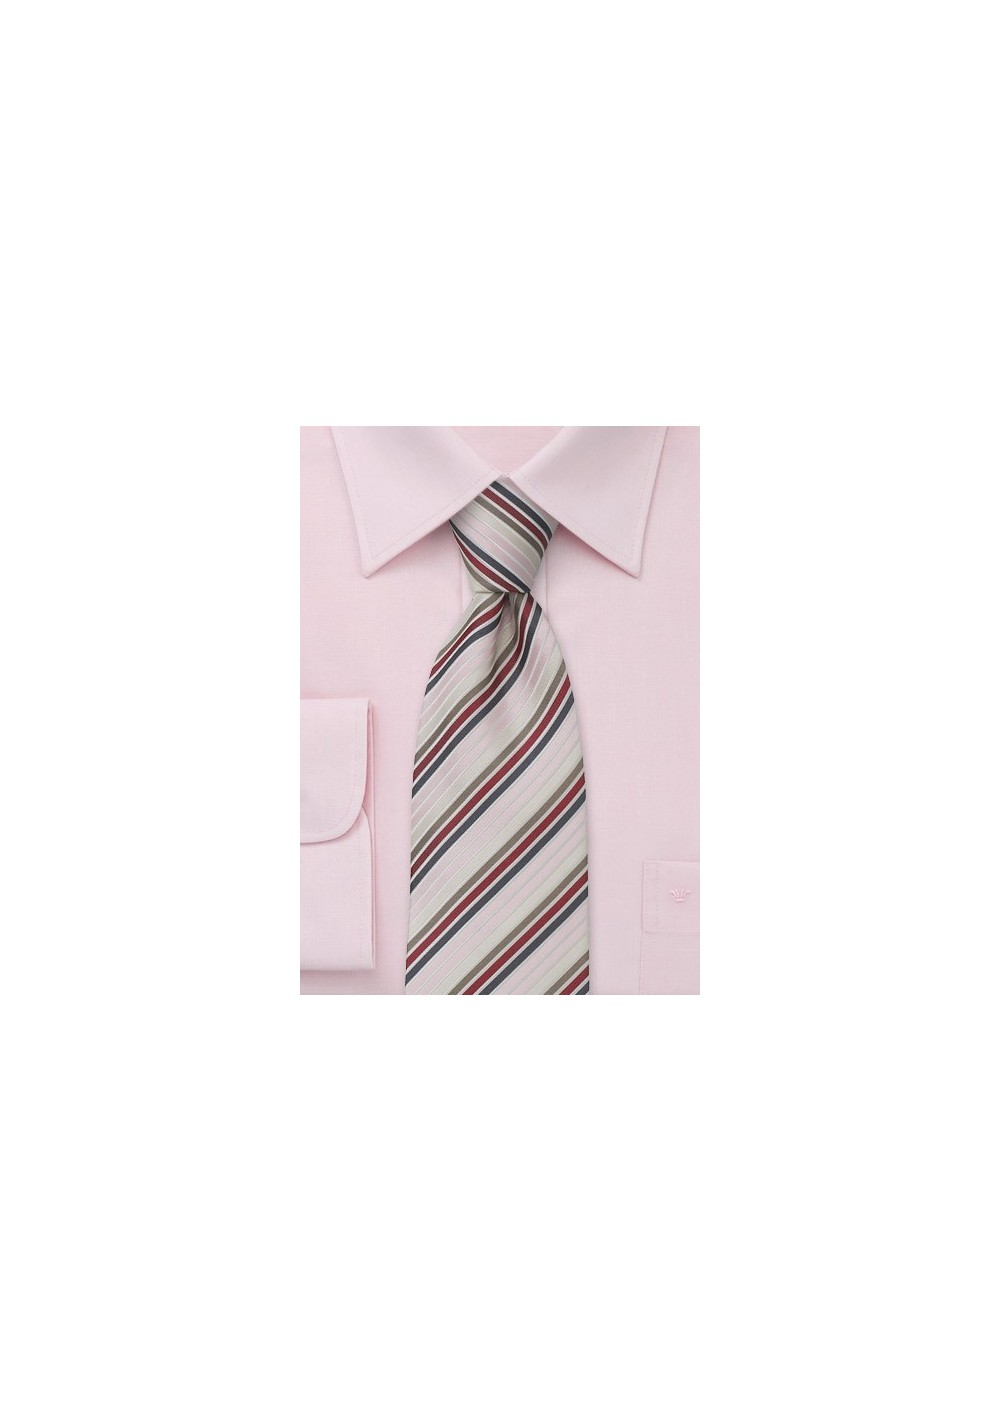 Striped pink necktie  -  Thin striped tie in pink, red and gray